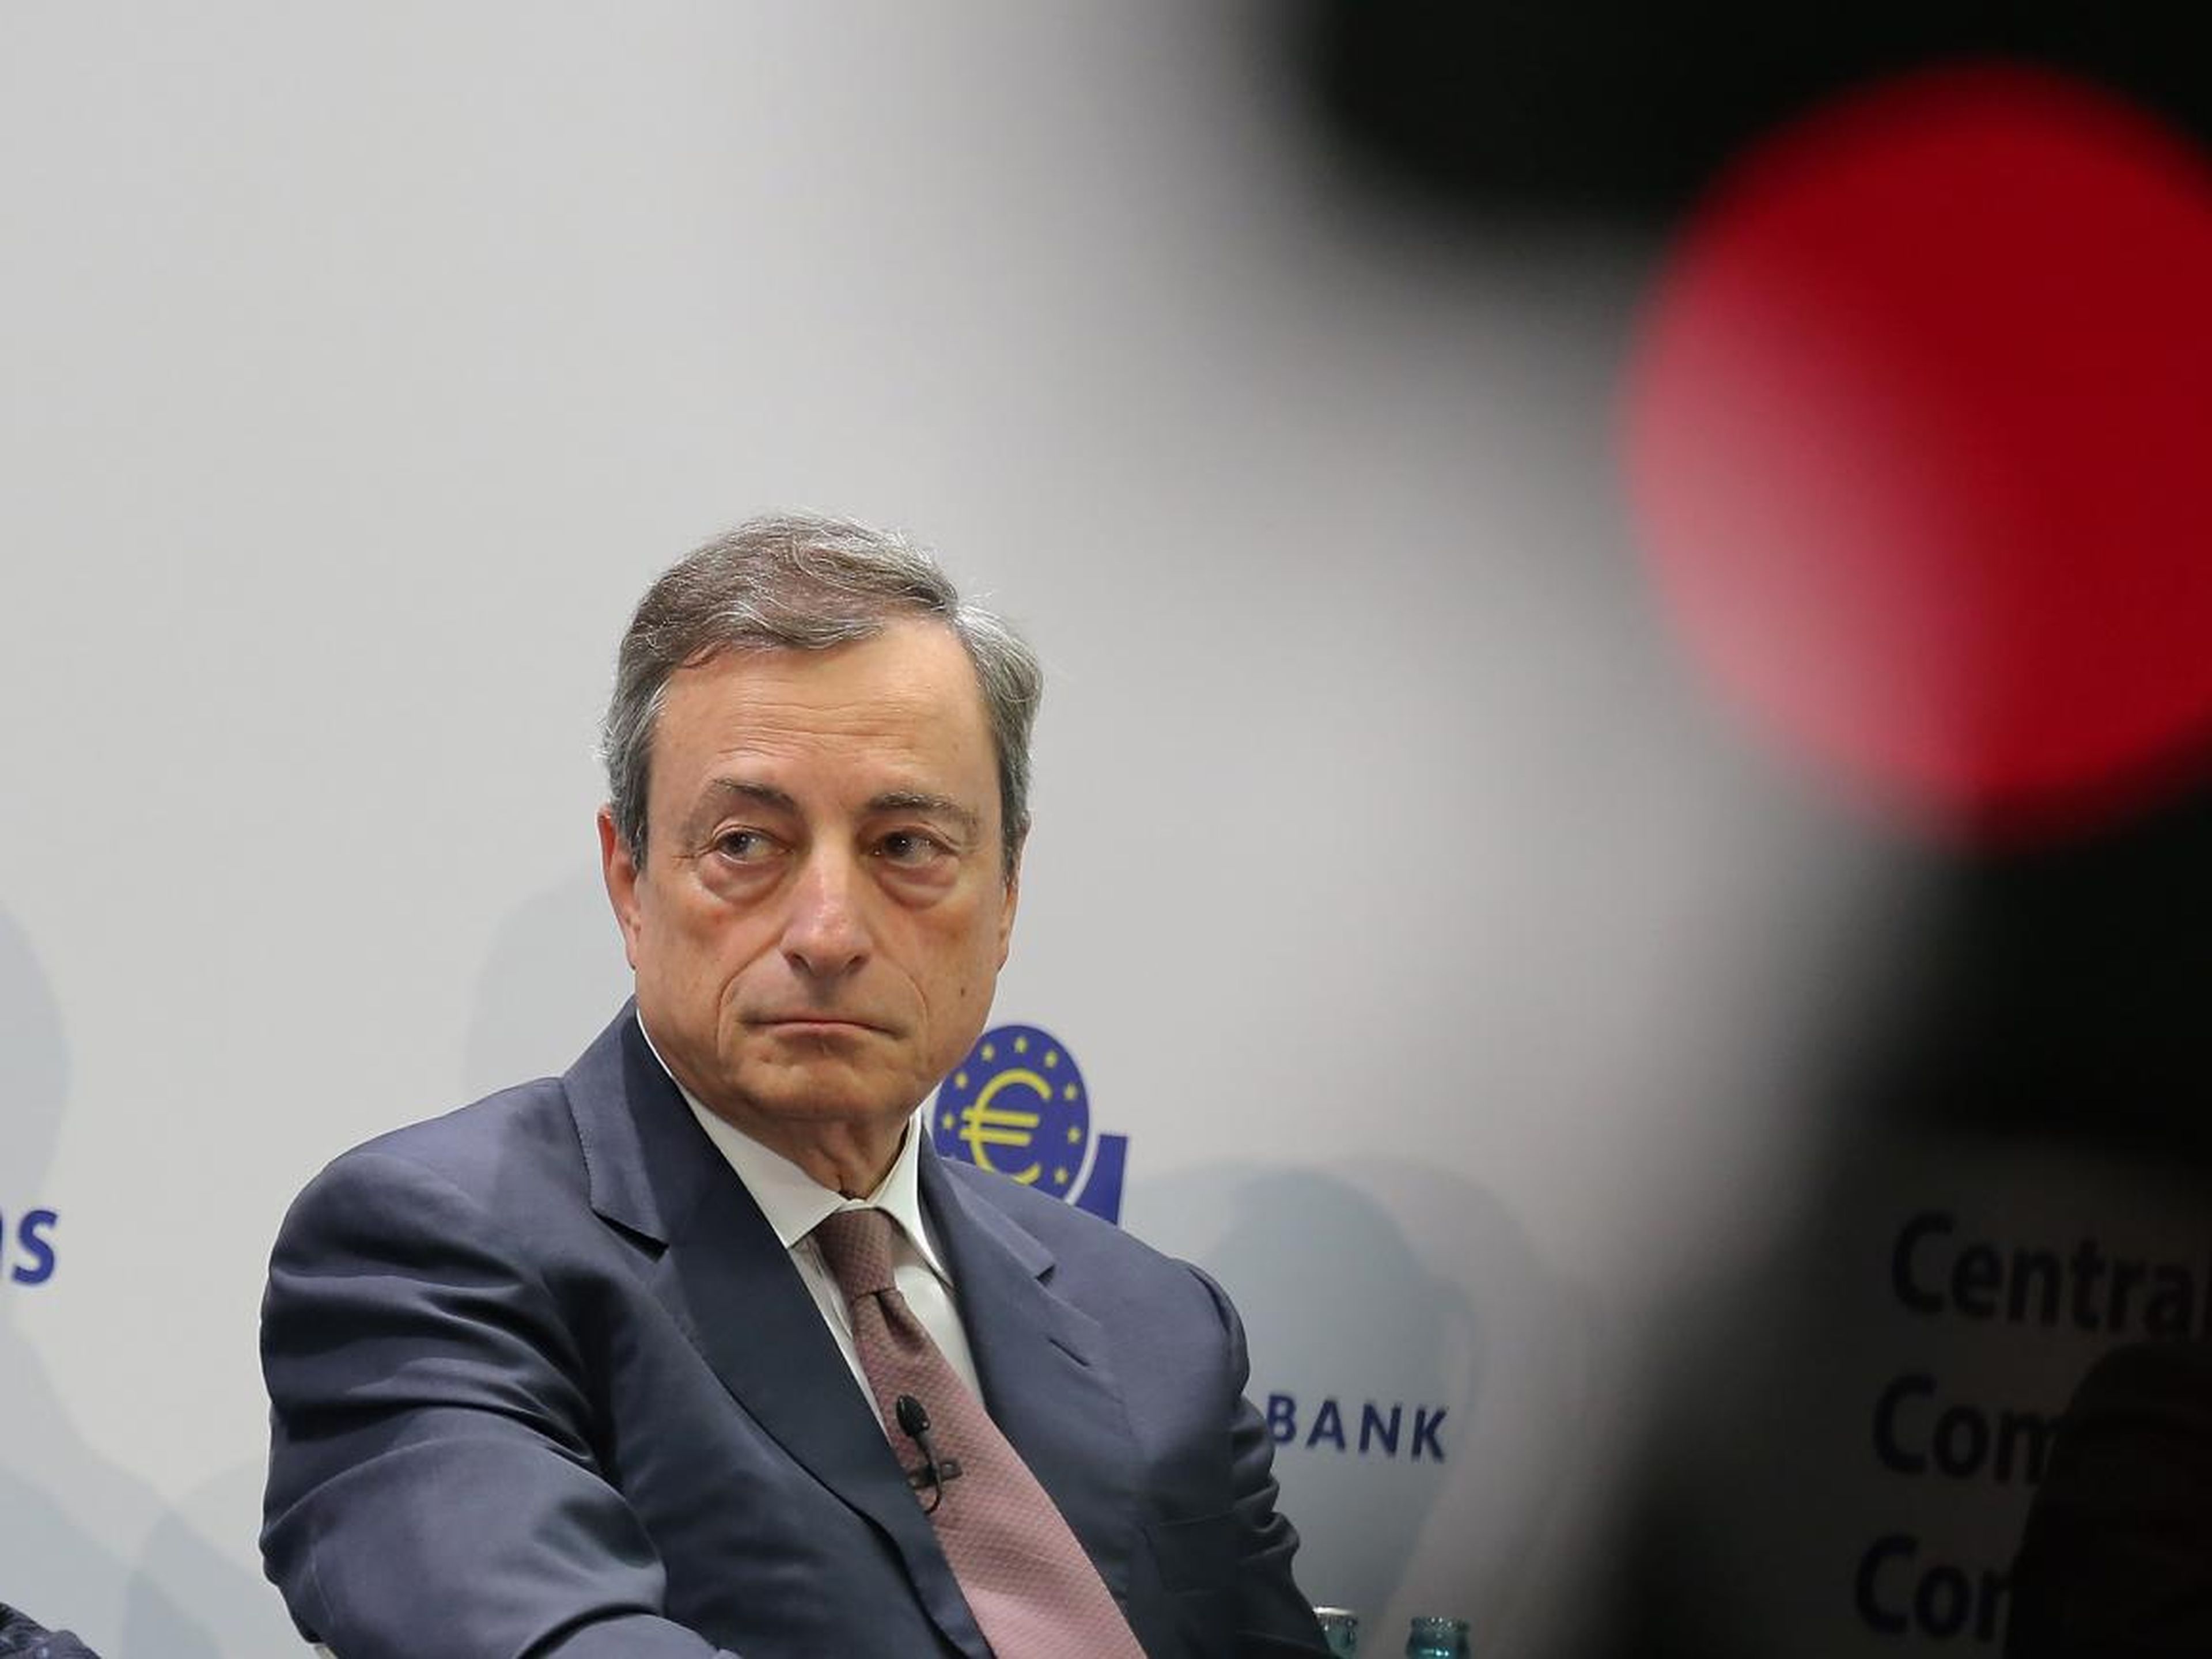 Mario Draghi, President of the European Central Bank (ECB), in a panel to discuss central bank communication on November 14, 2017 in Frankfurt, Germany.